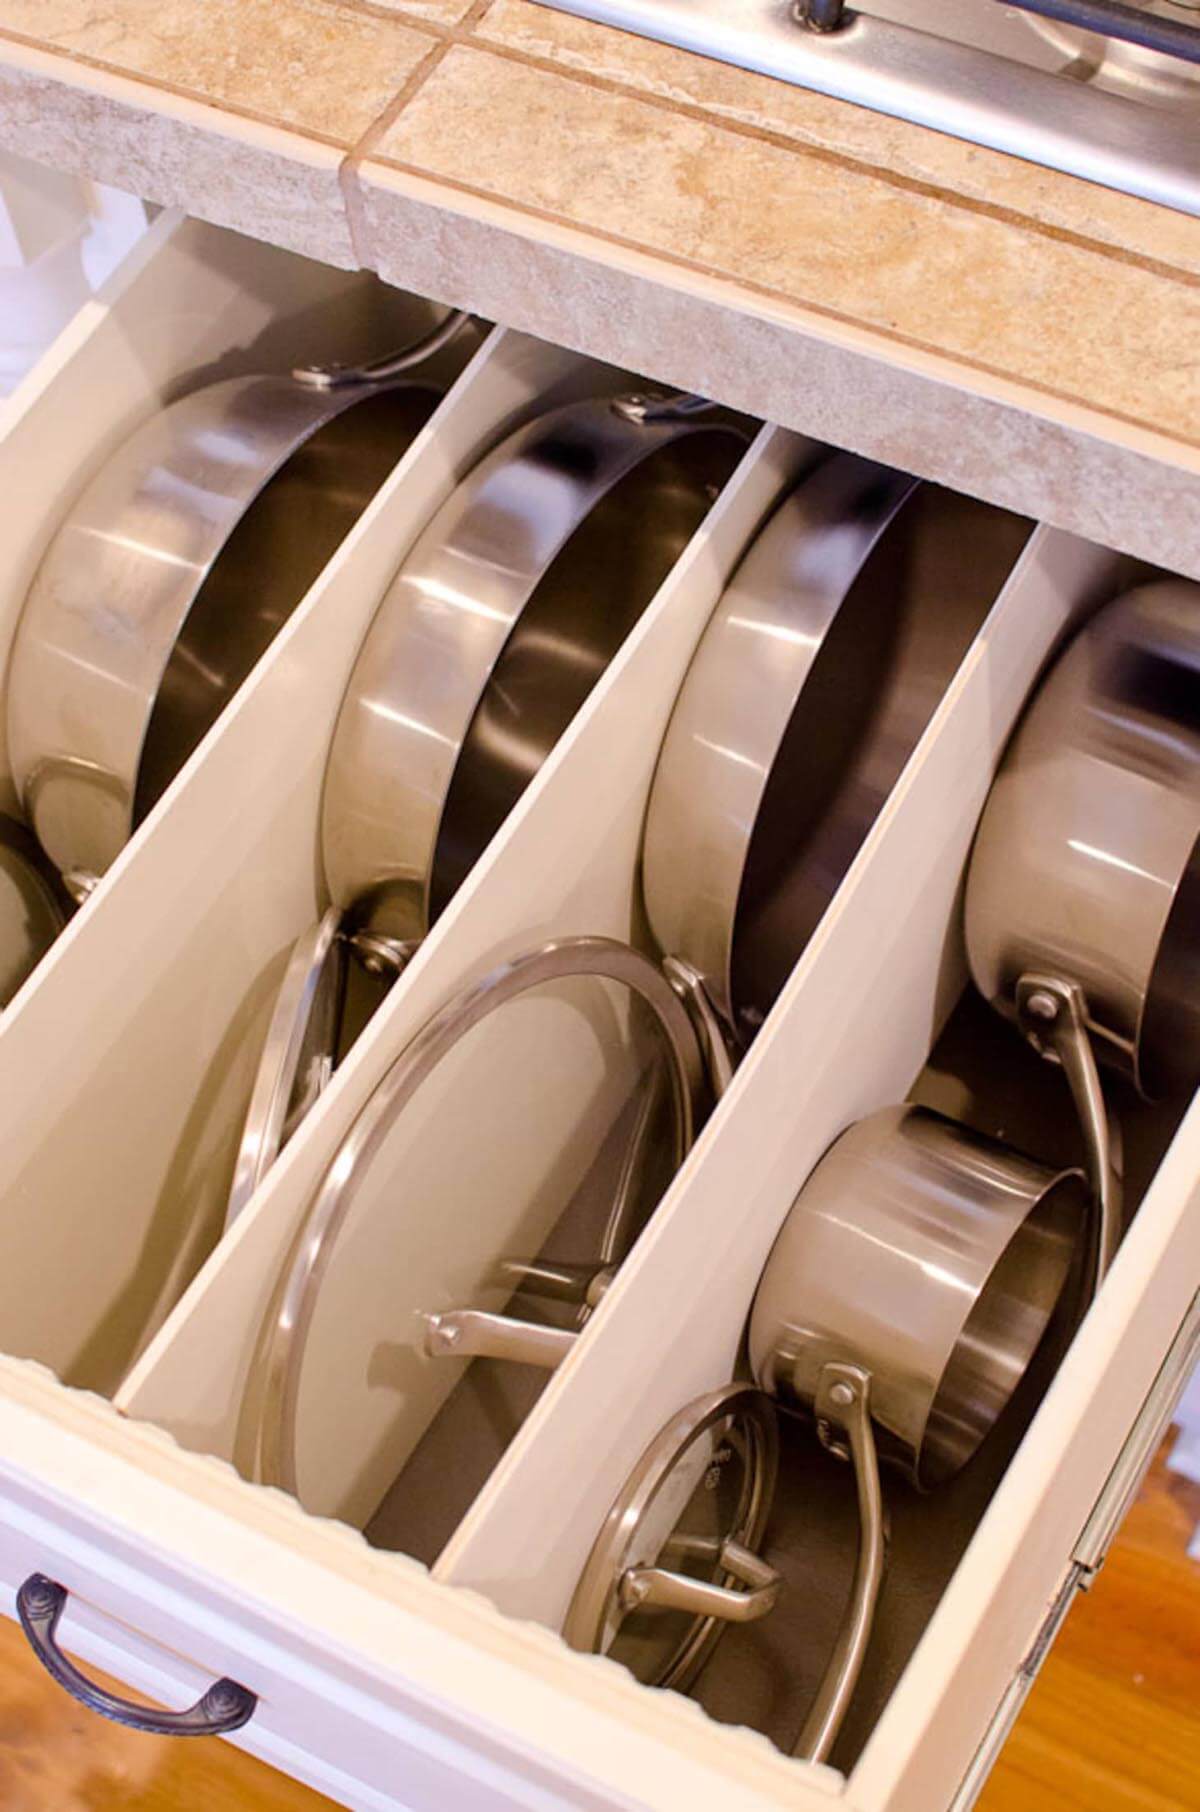 Classy And Perfect Organization For Pots And Pans